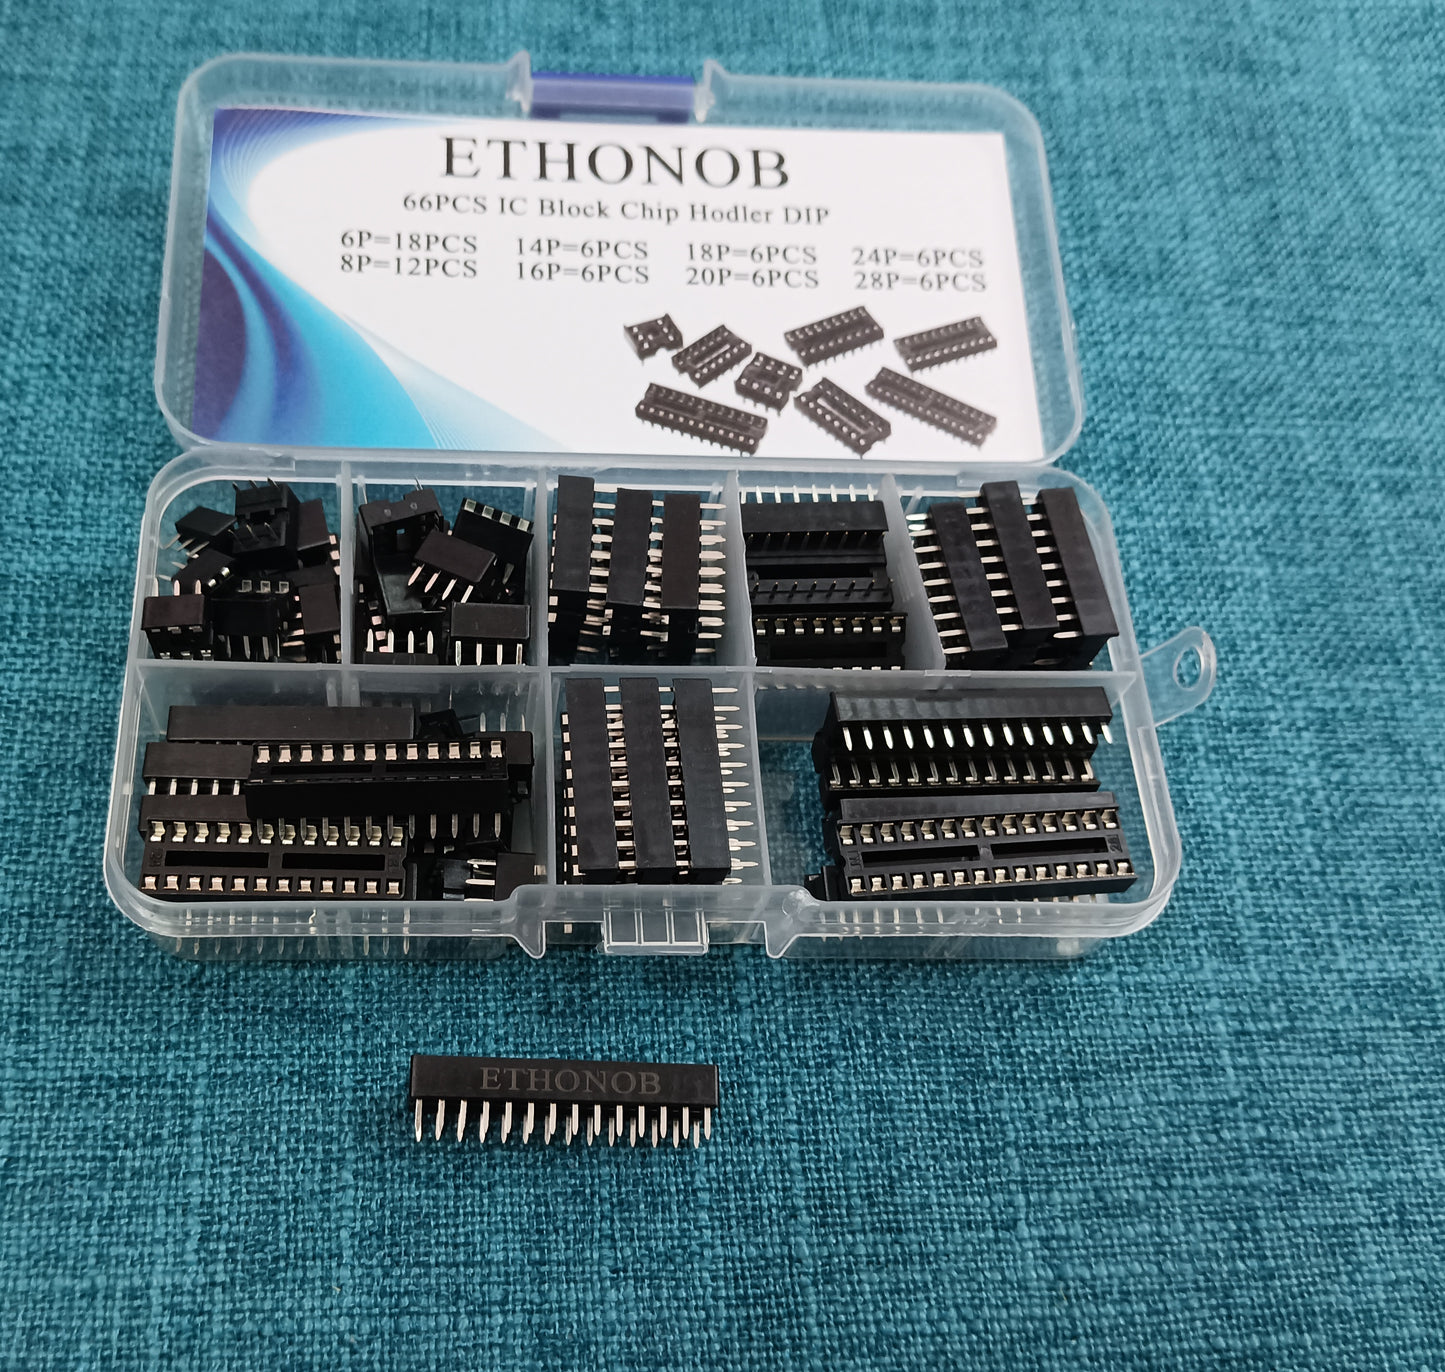 ETHONOB Integrated circuits Electronic components with single chip resistor-capacitor integrated circuits multiple specifications integrated circuits versatile